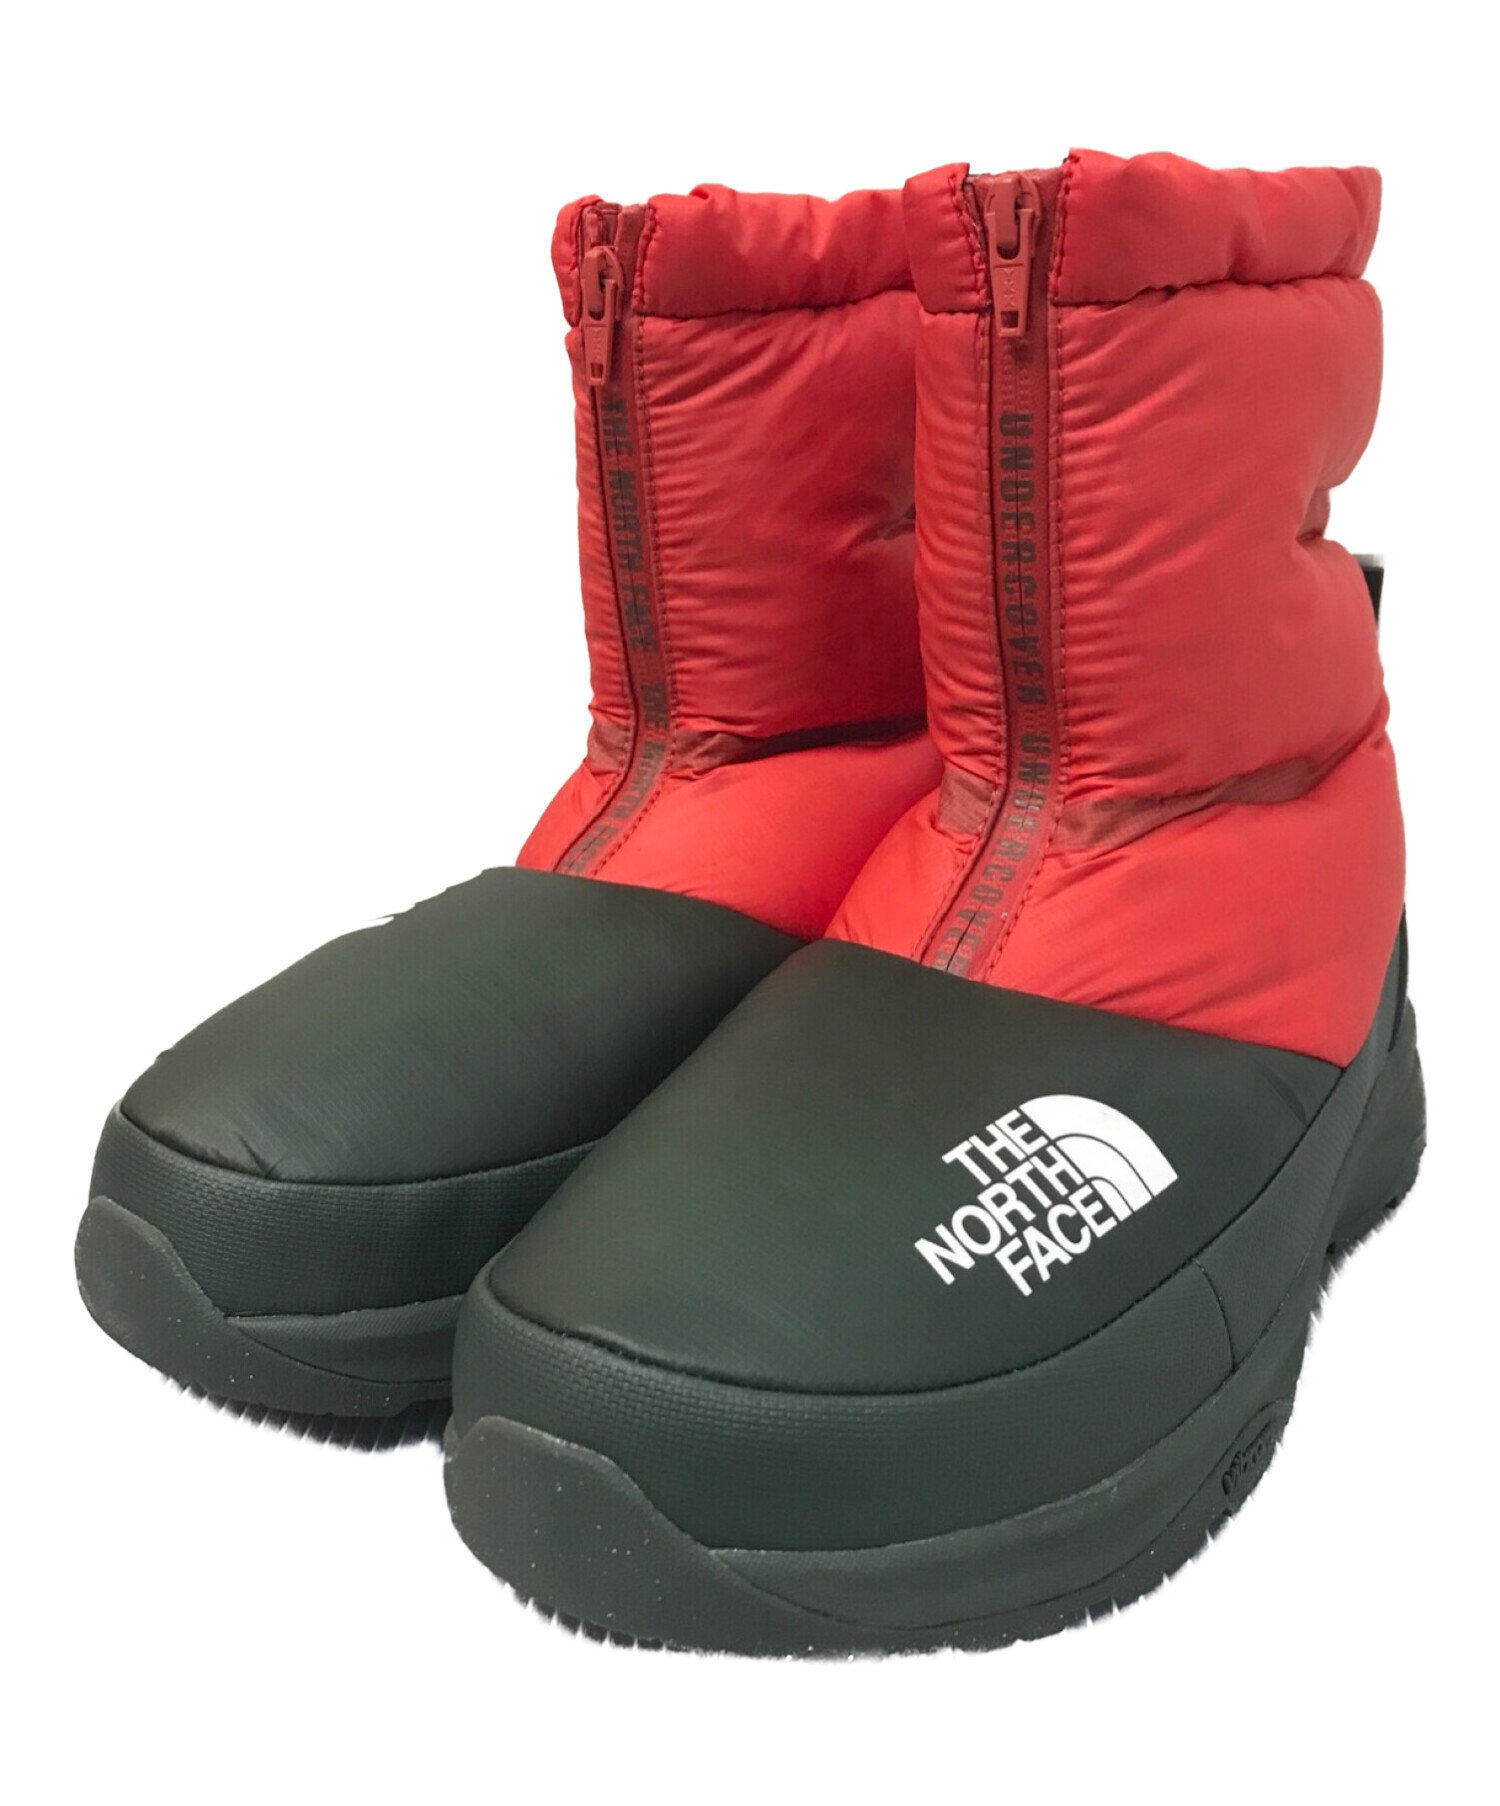 THE NORTH FACE (ザ ノース フェイス) UNDERCOVER (アンダーカバー) UNDERCOVER Down Bootie レッド  サイズ:SIZE 10